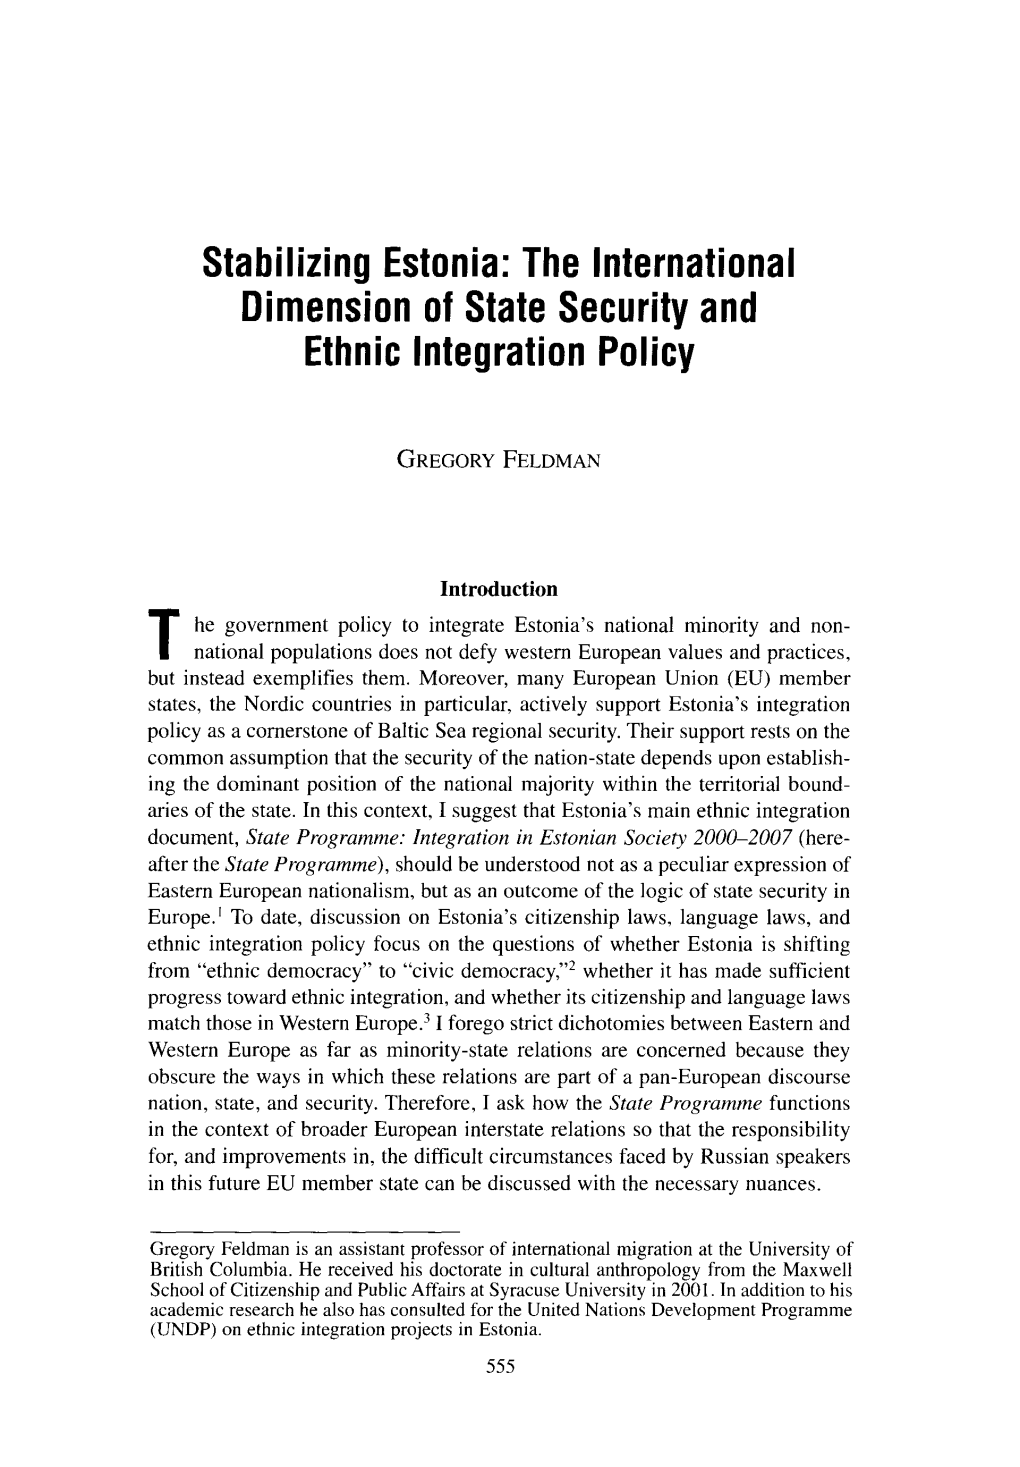 Stabilizing Estonia : the International Dimension of State Security and Ethnic Integration Policy